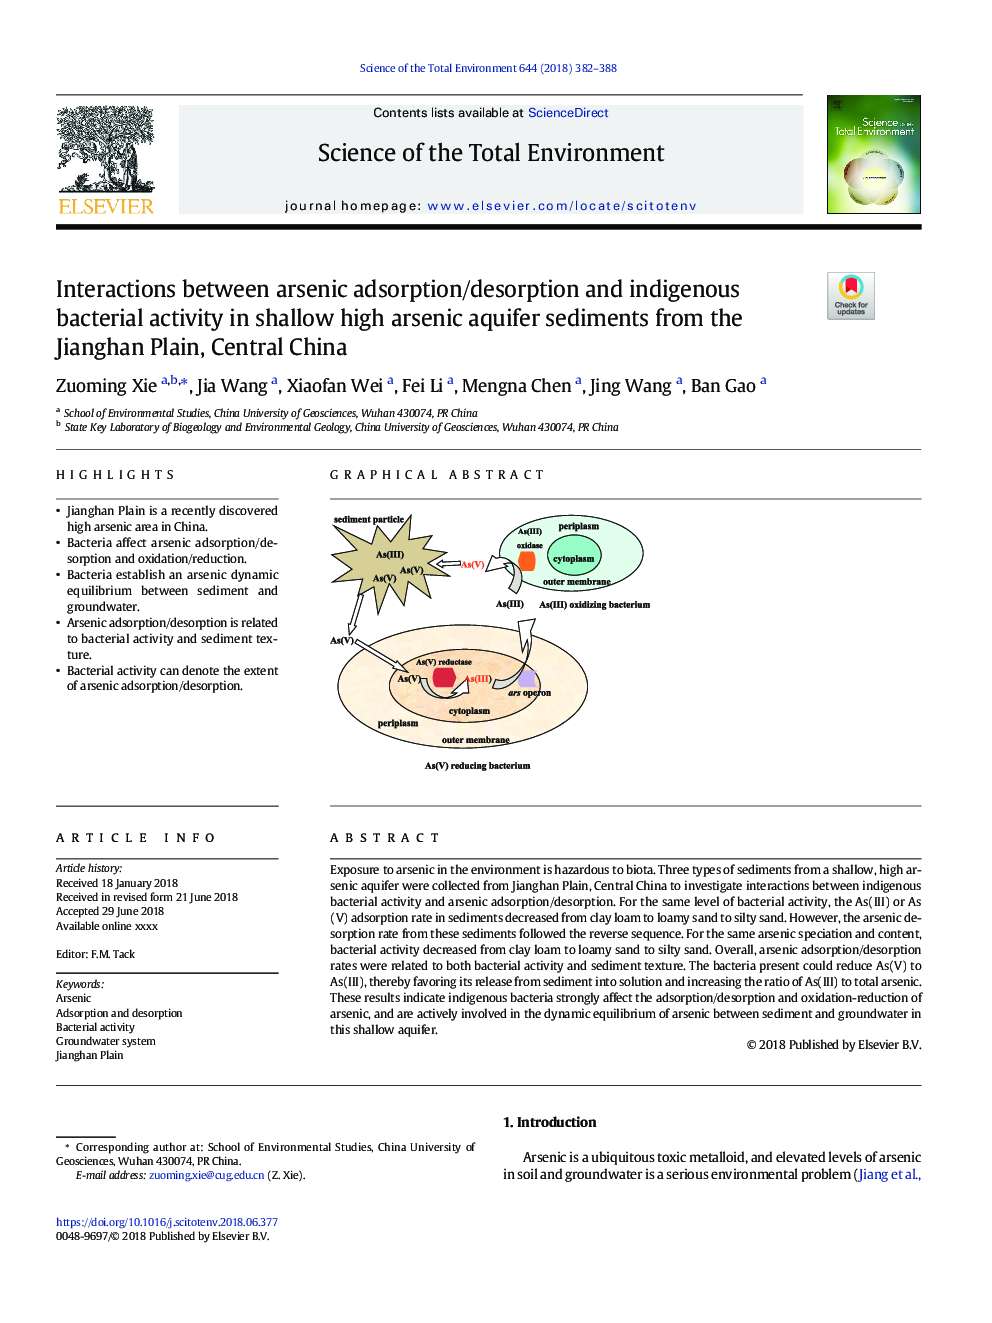 Interactions between arsenic adsorption/desorption and indigenous bacterial activity in shallow high arsenic aquifer sediments from the Jianghan Plain, Central China